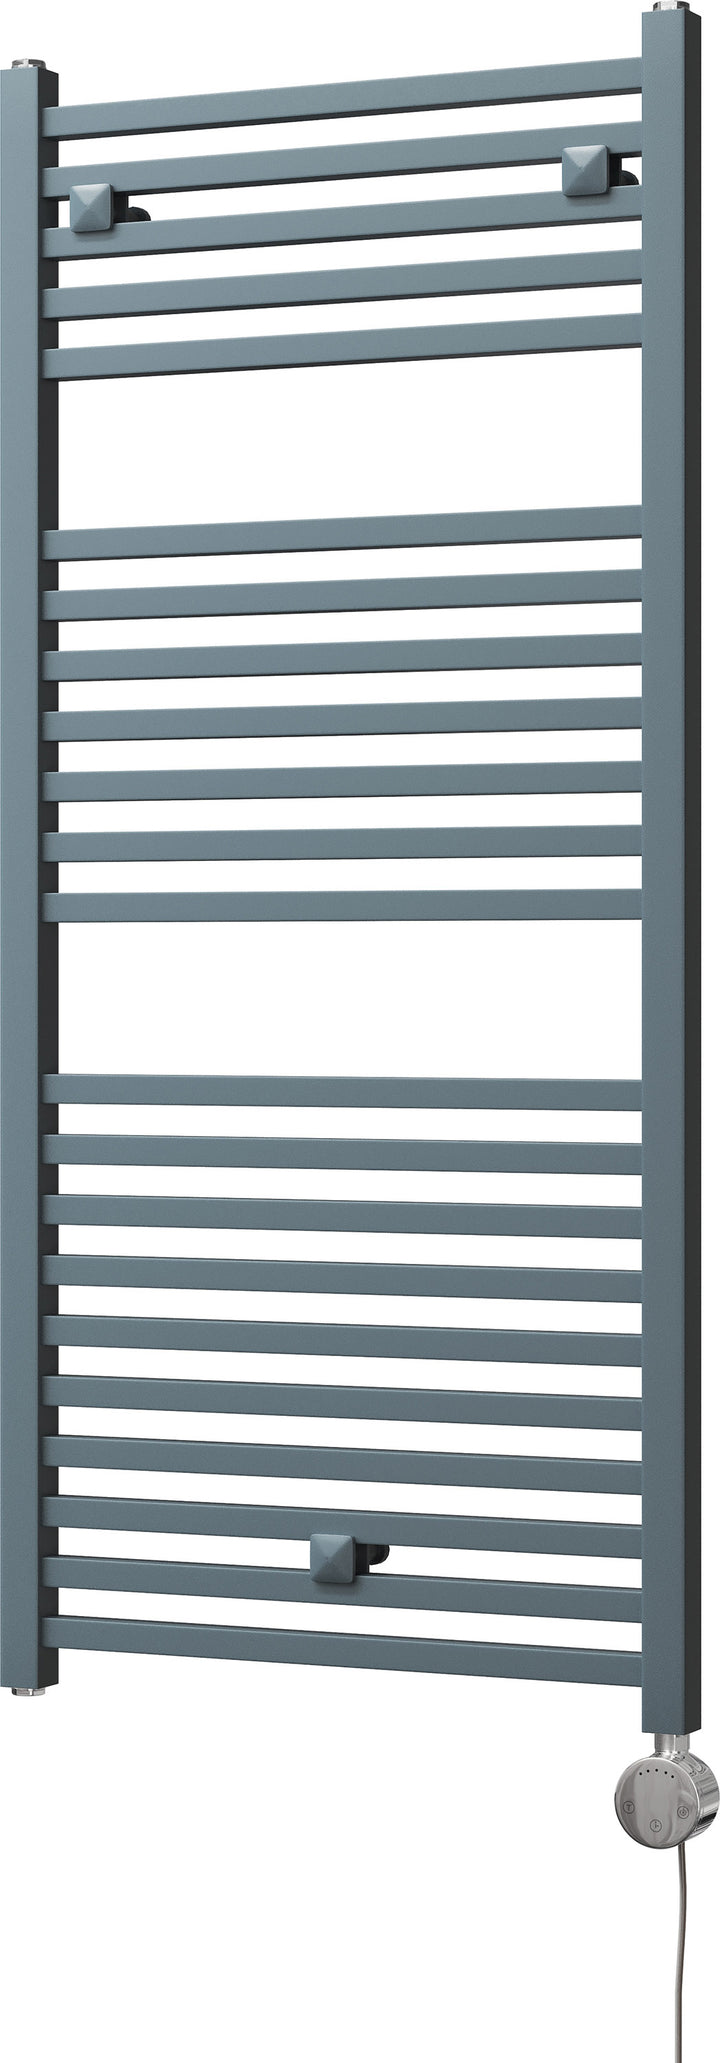 Todi - Anthracite Electric Towel Rail H1110mm x W500mm Straight 600w Thermostatic